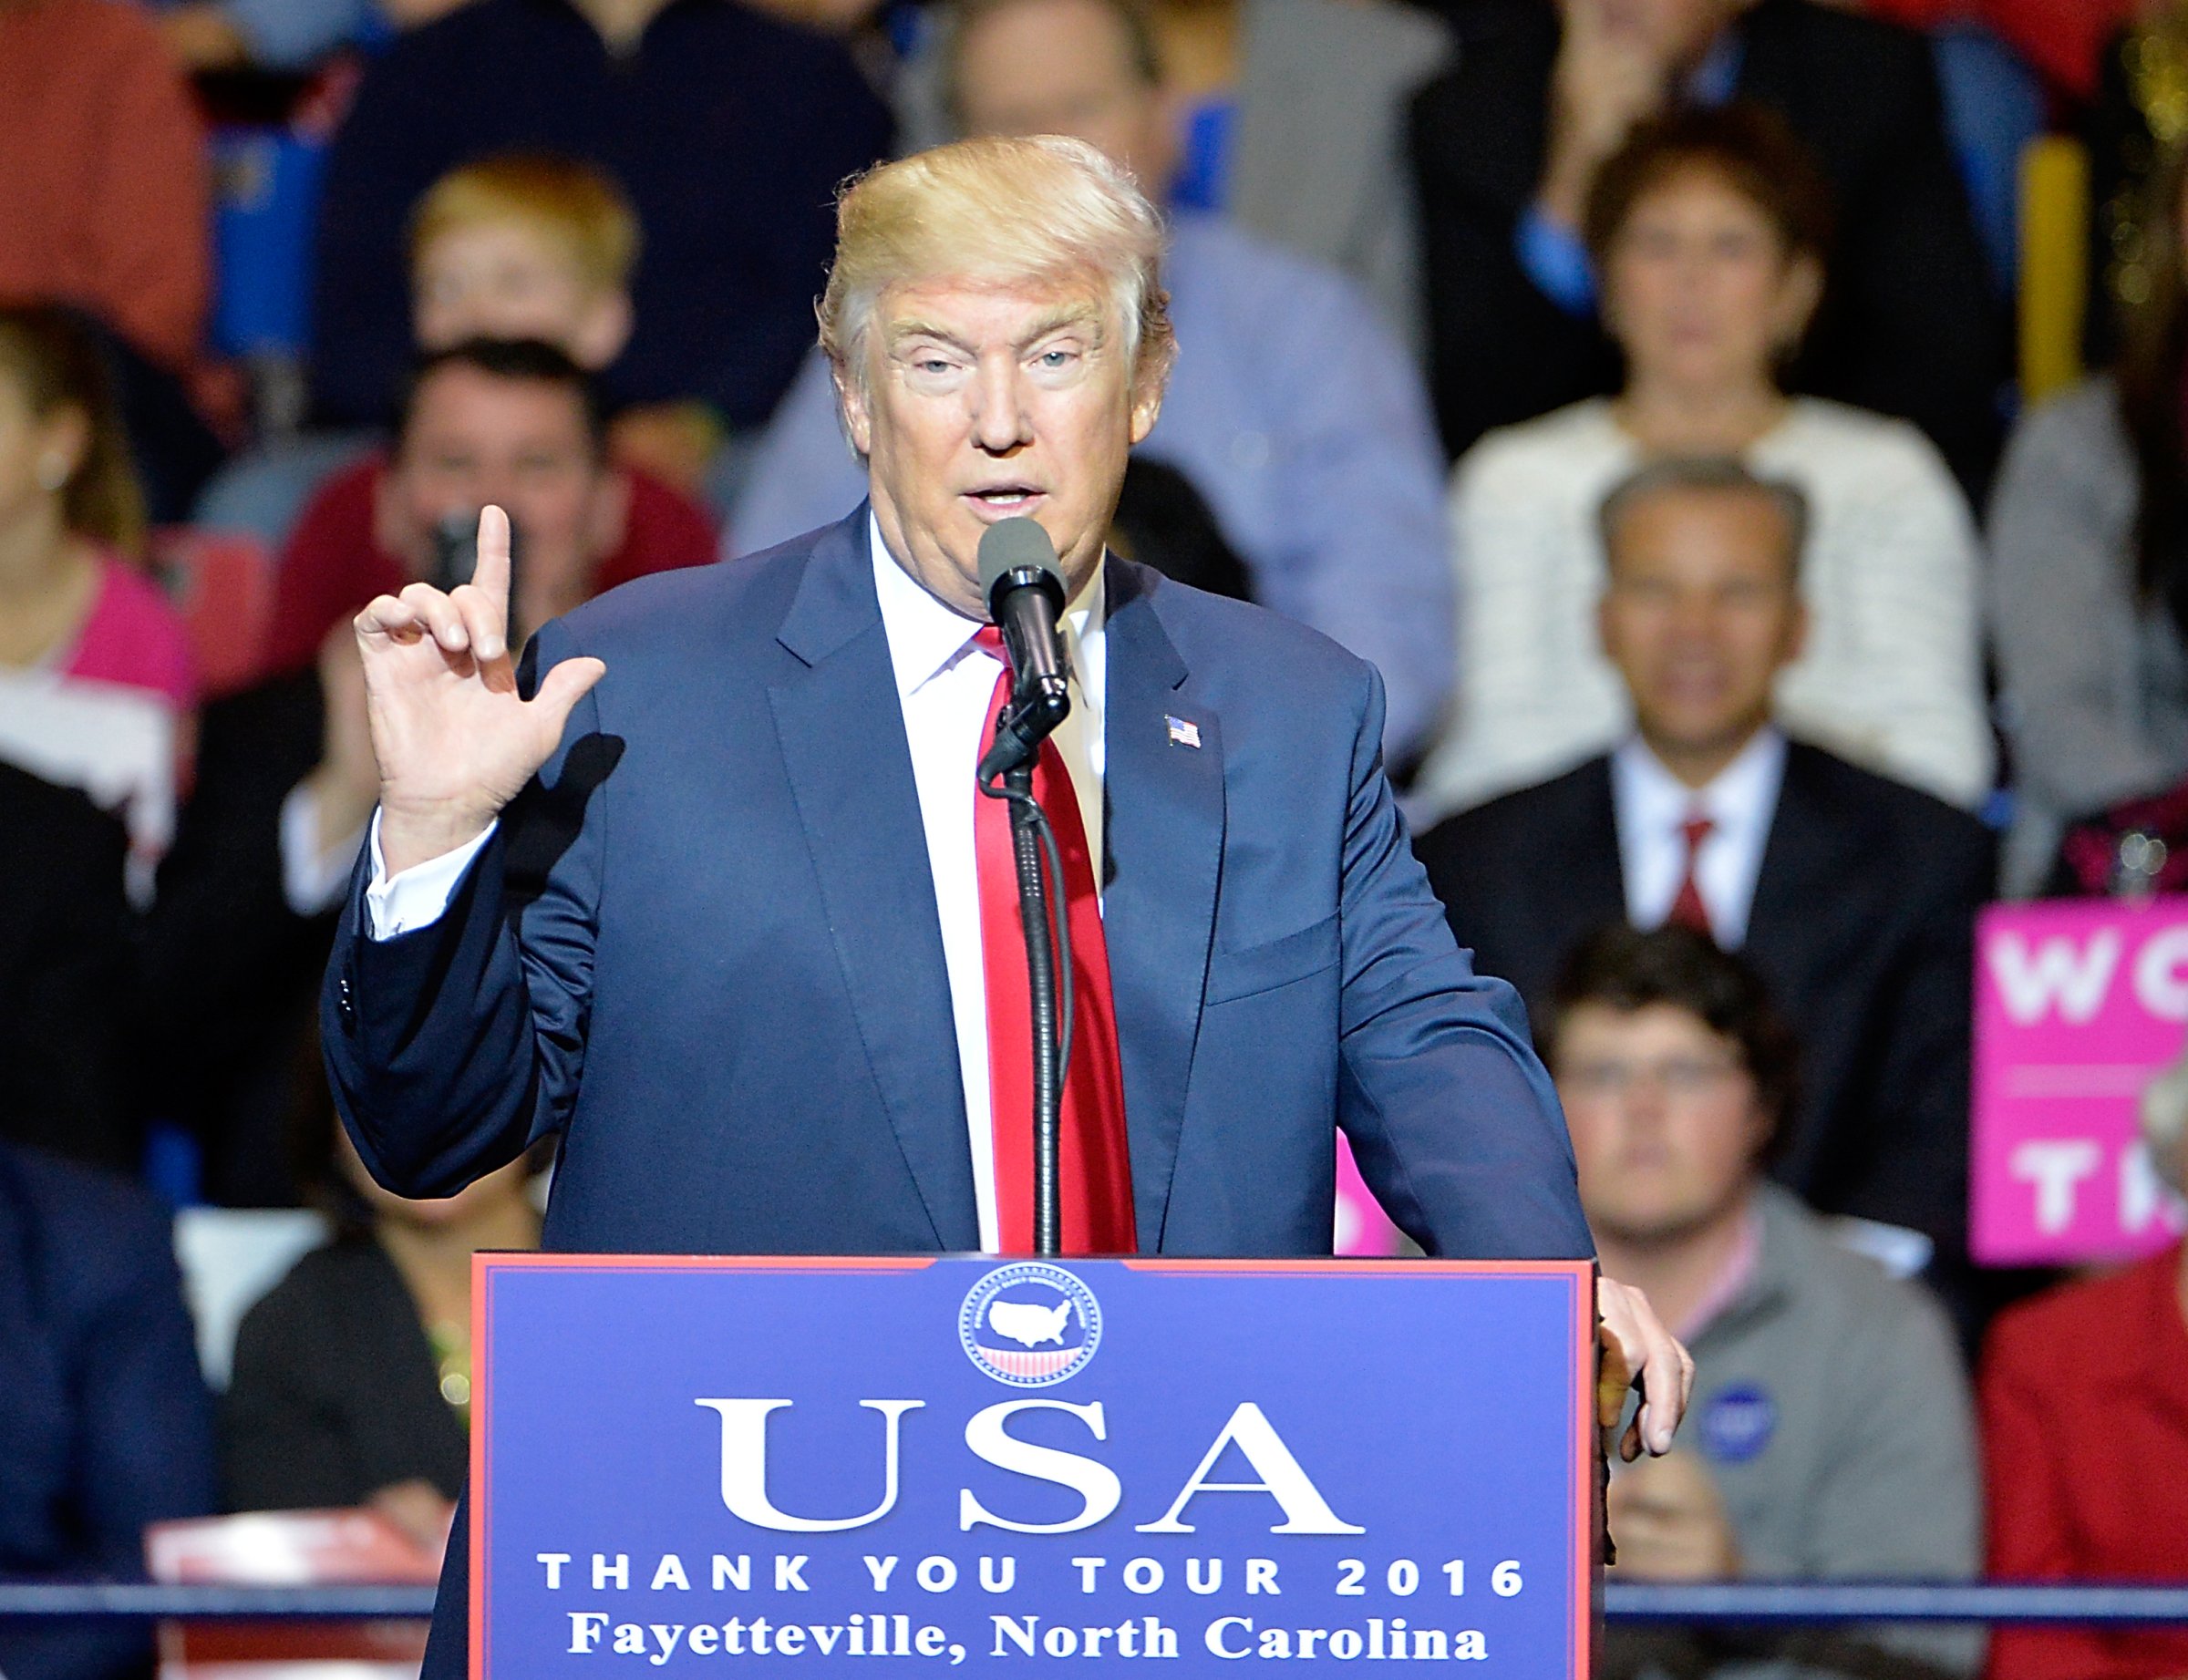 President-elect Donald Trump addresses an audience at Crown Coliseum on December 6, 2016 in Fayetteville, North Carolina.